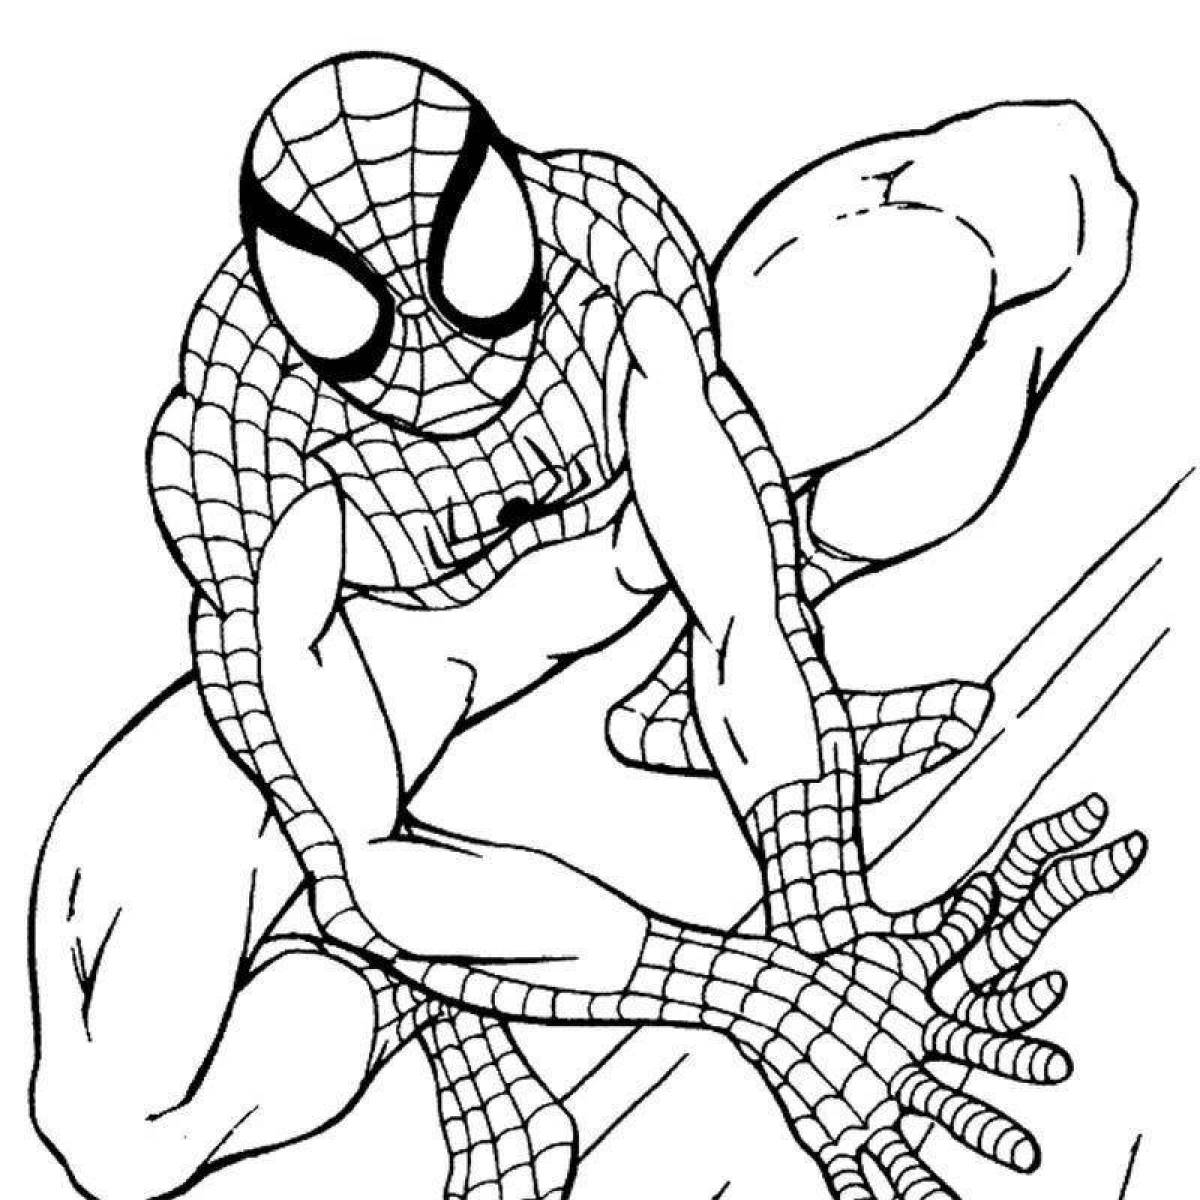 Fun coloring pages for 10 year old boys